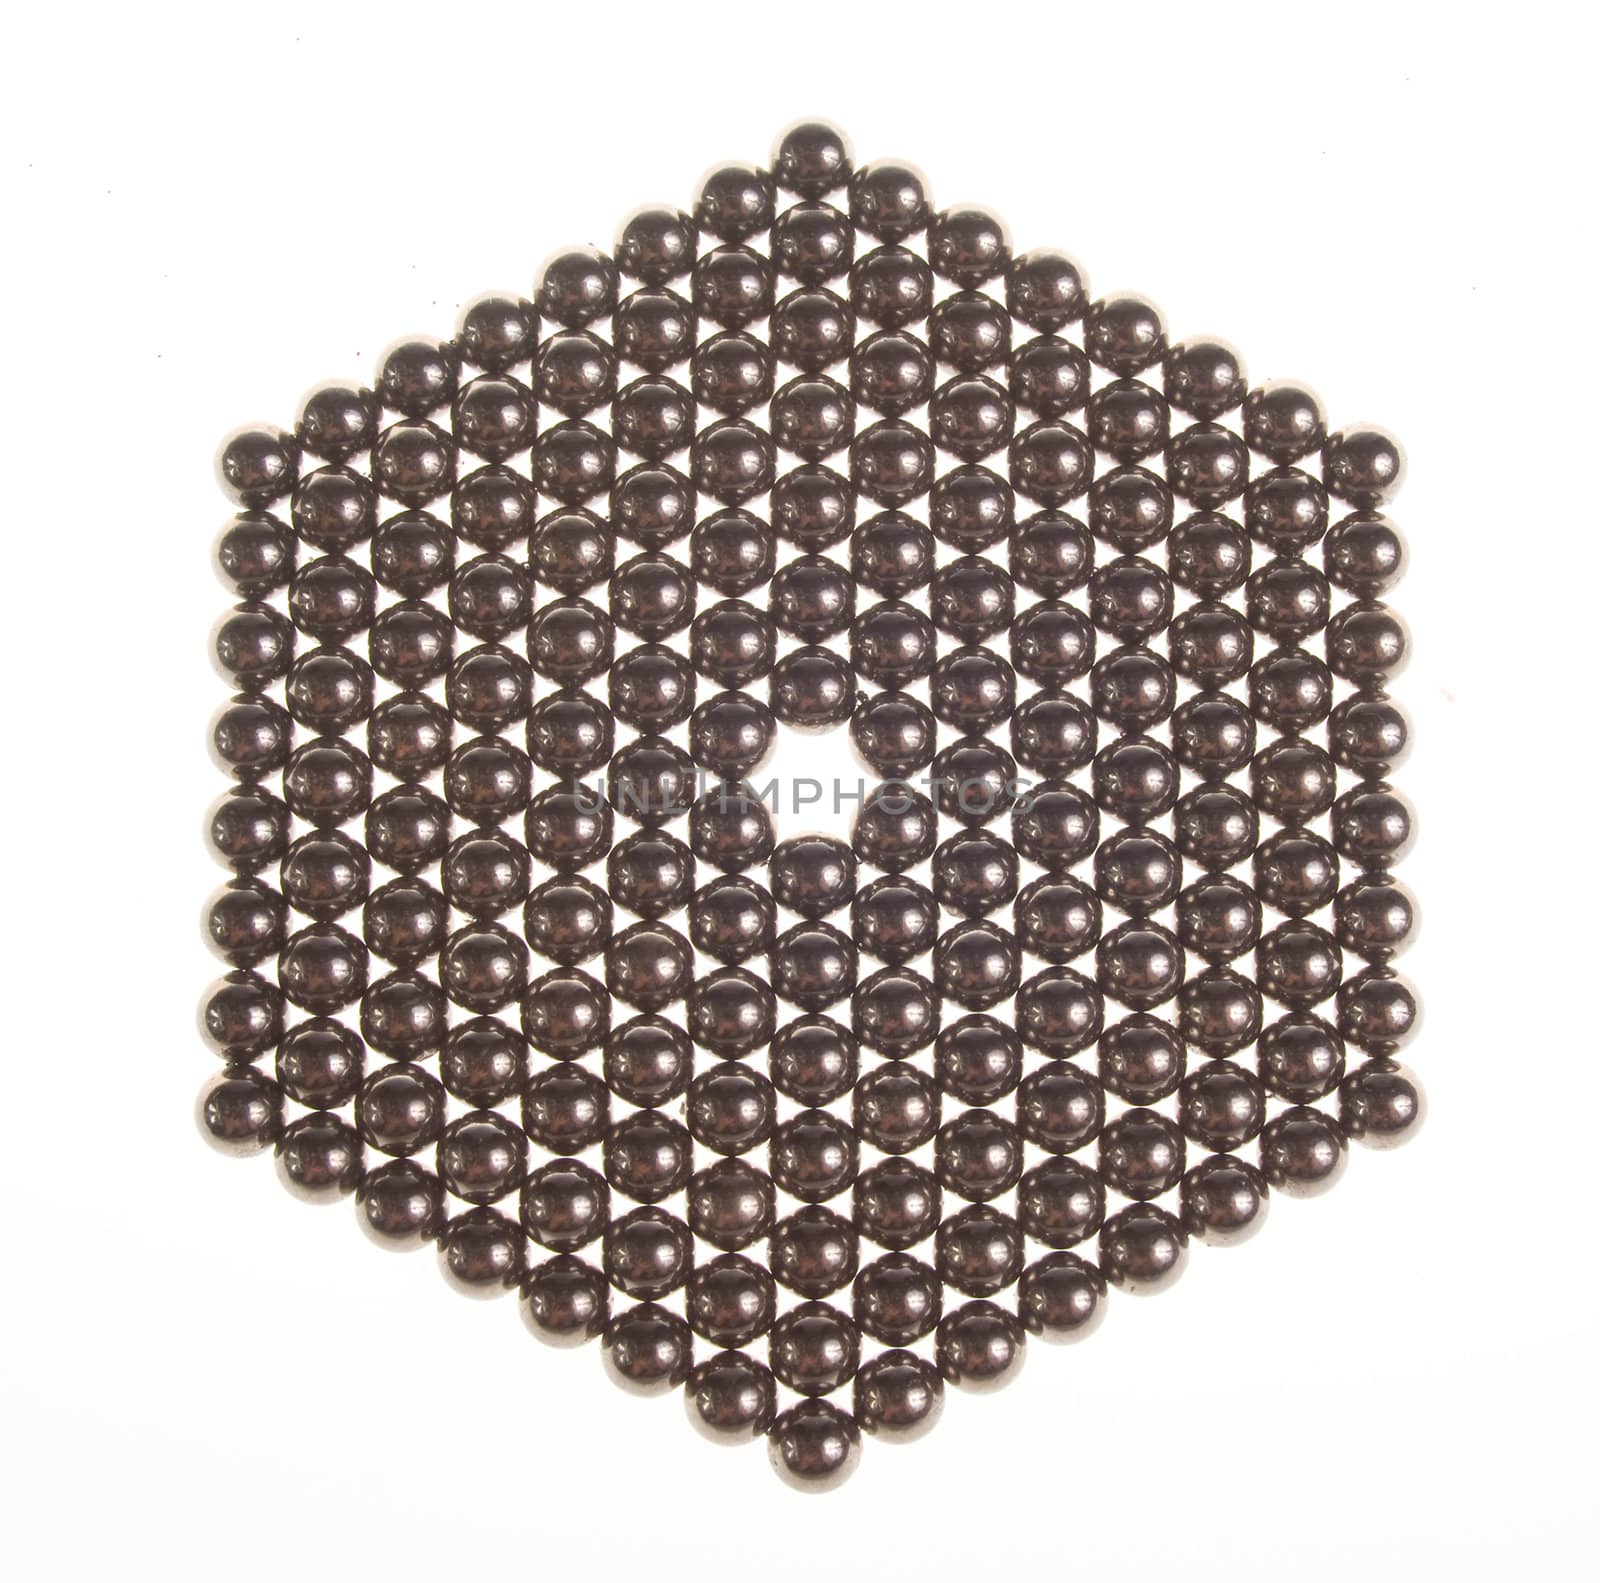 Hexagon of small metal balls on the white background